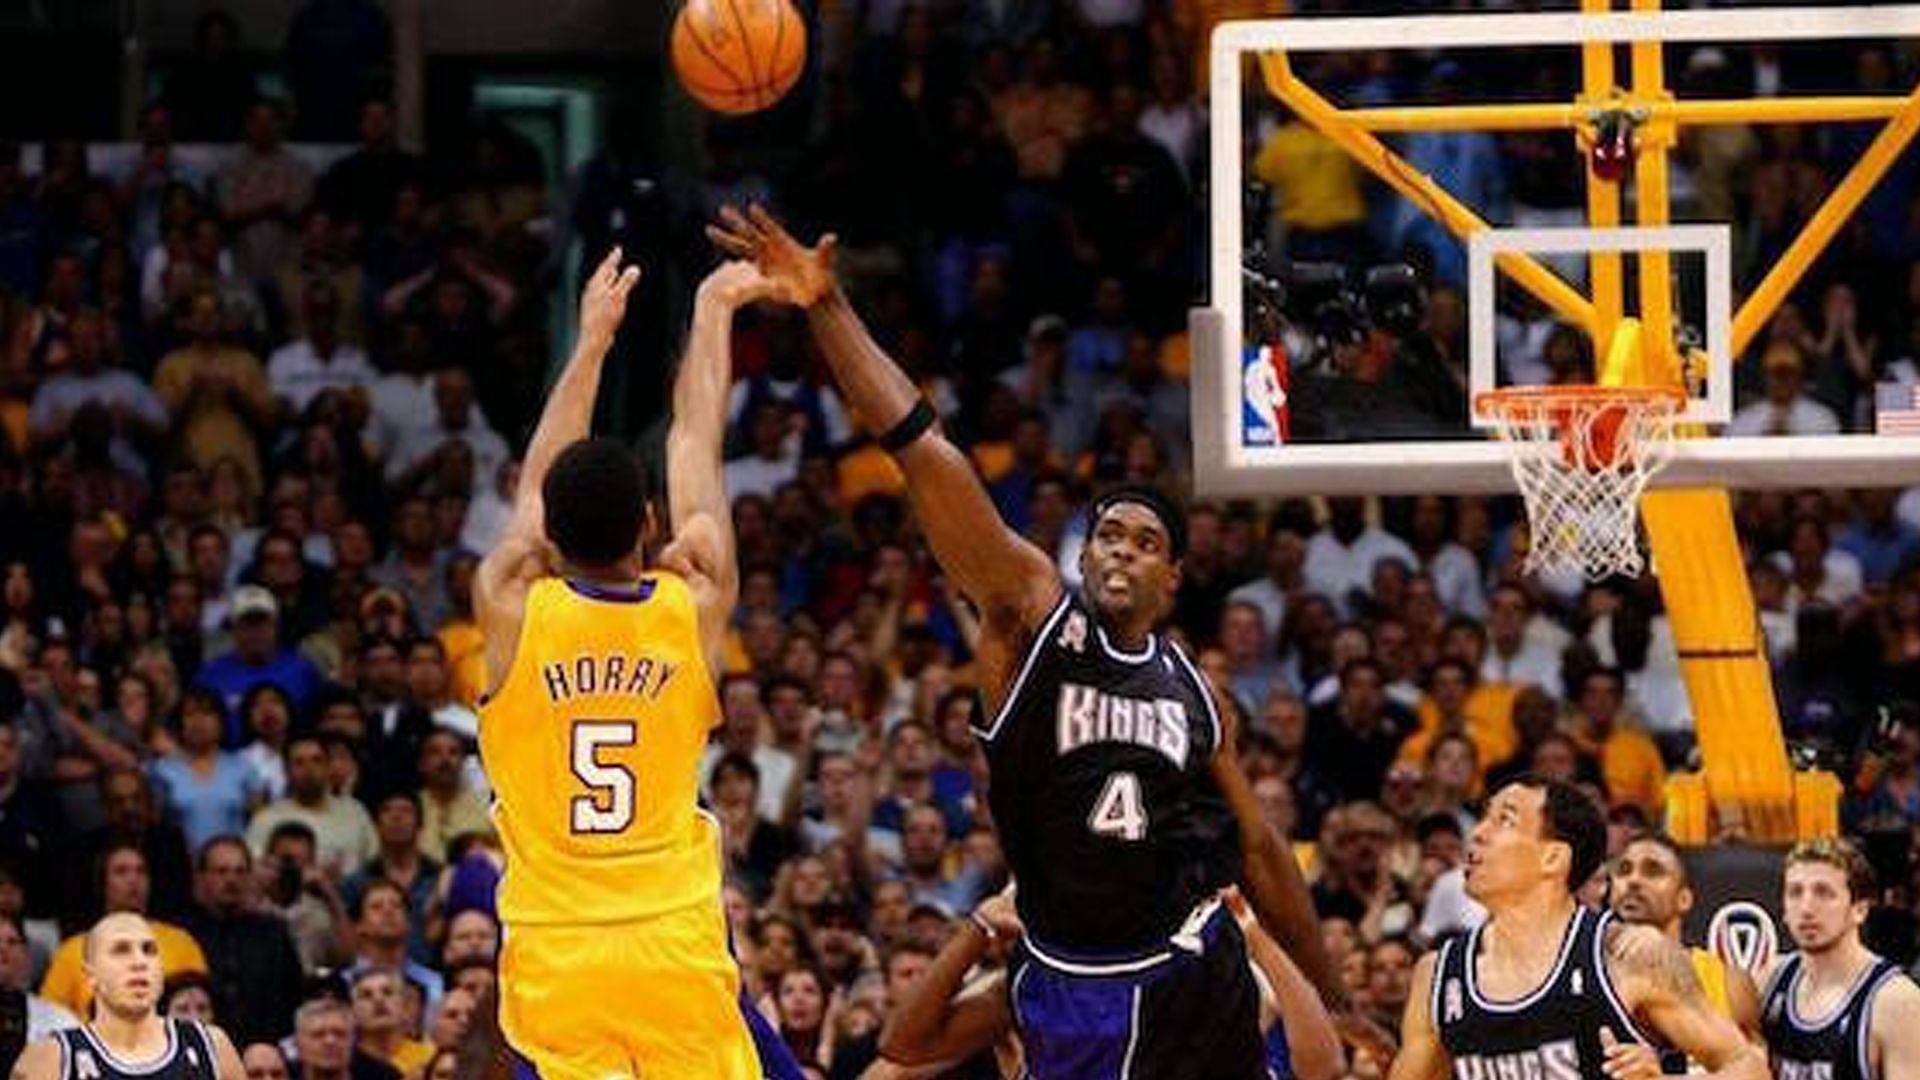 The greatest of all time loses sometimes — Robert Horry believes